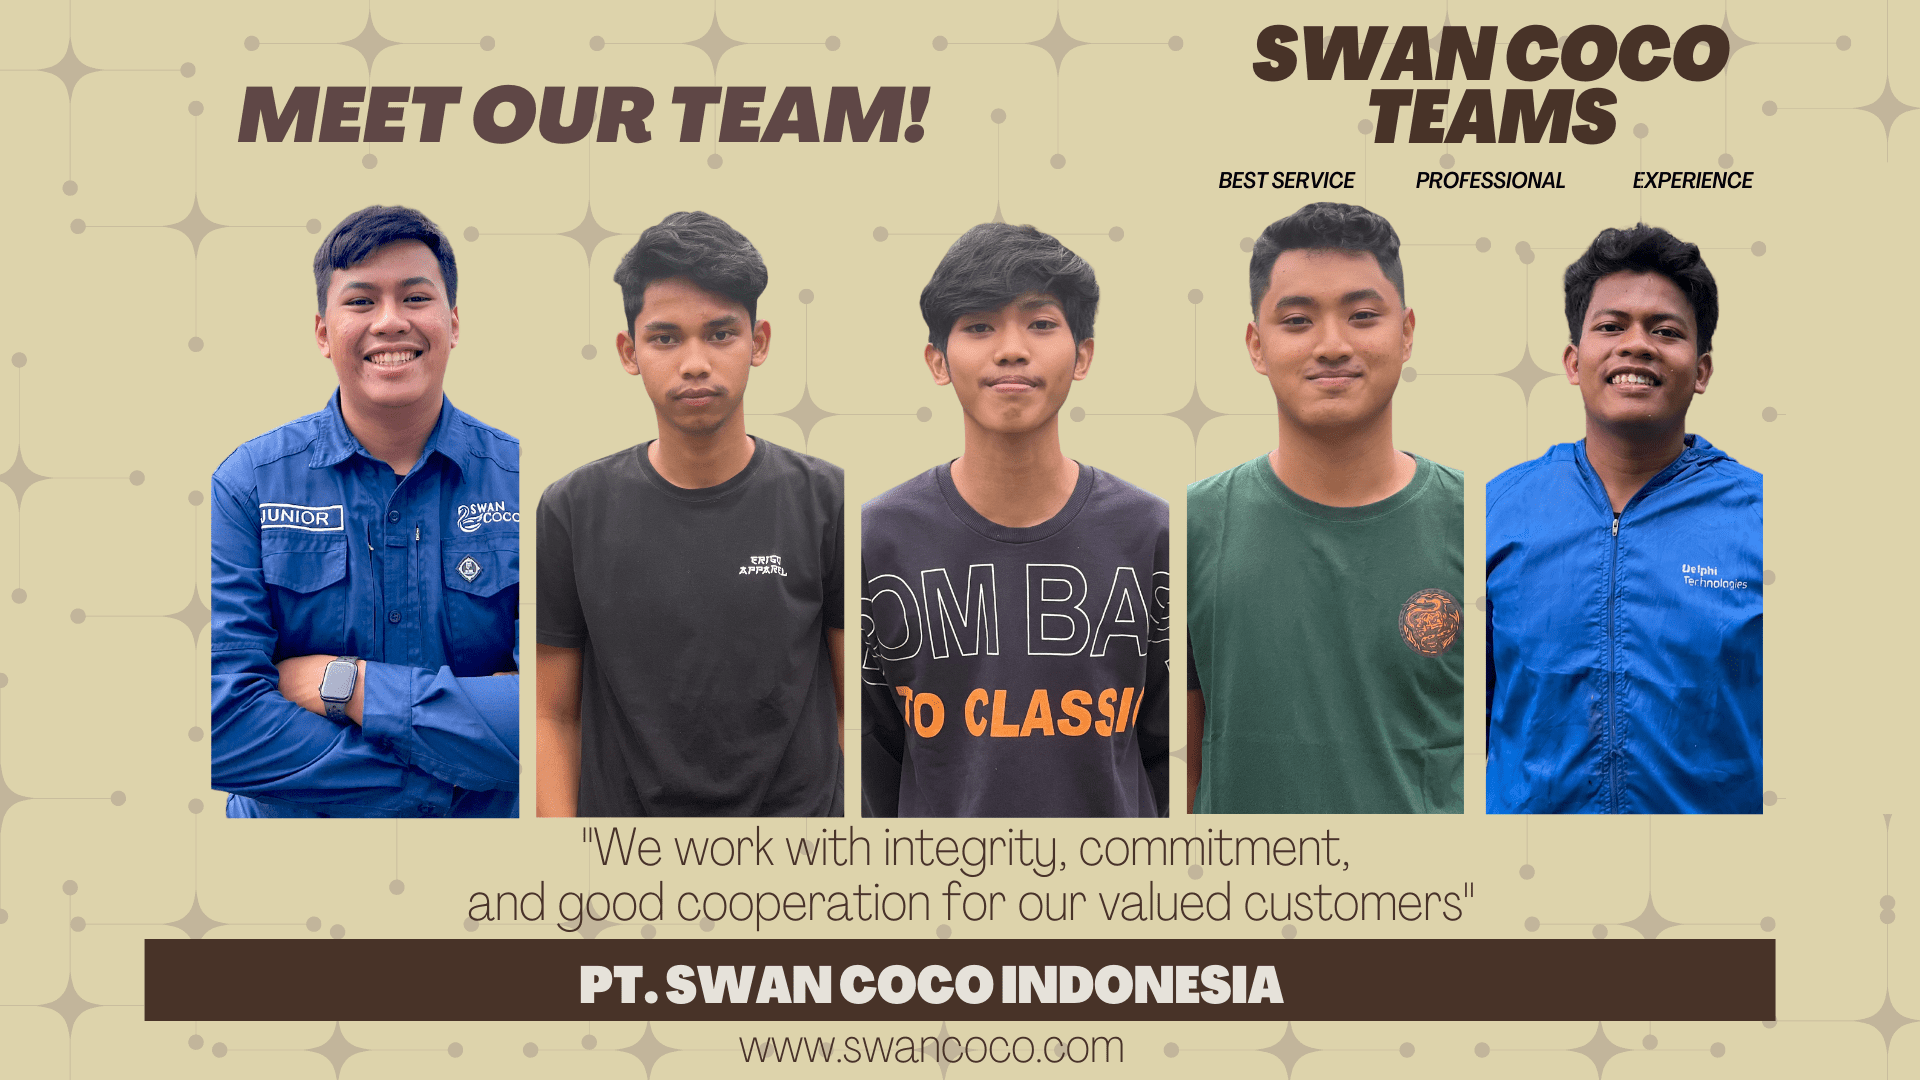 SWAN COCO INDONESIA